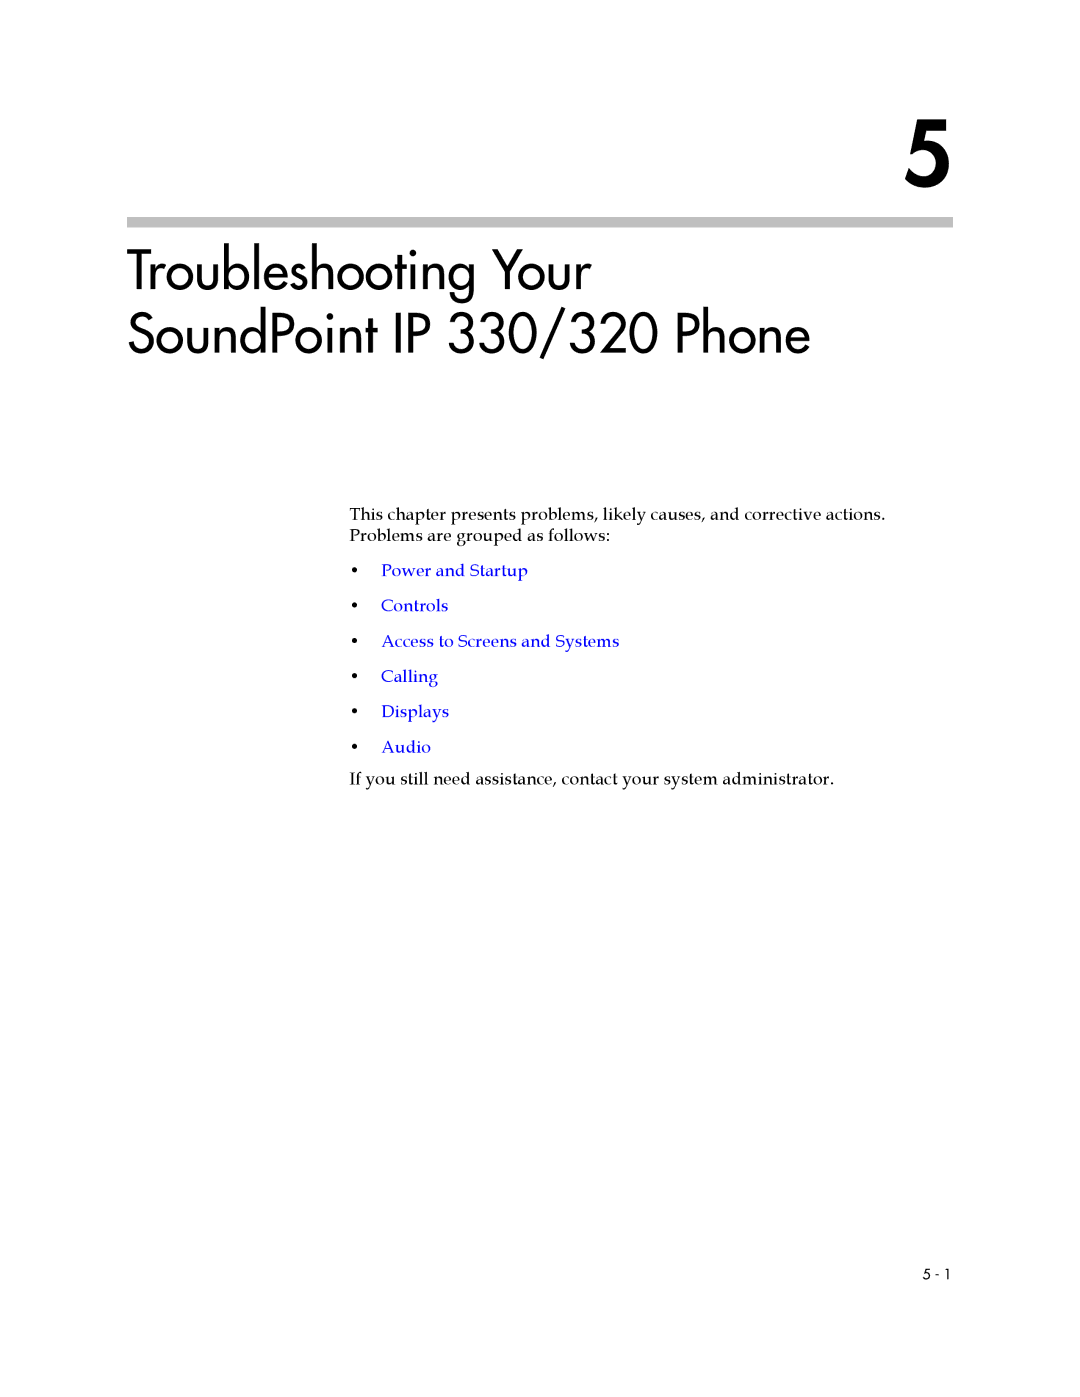 Polycom manual Troubleshooting Your SoundPoint IP 330/320 Phone 